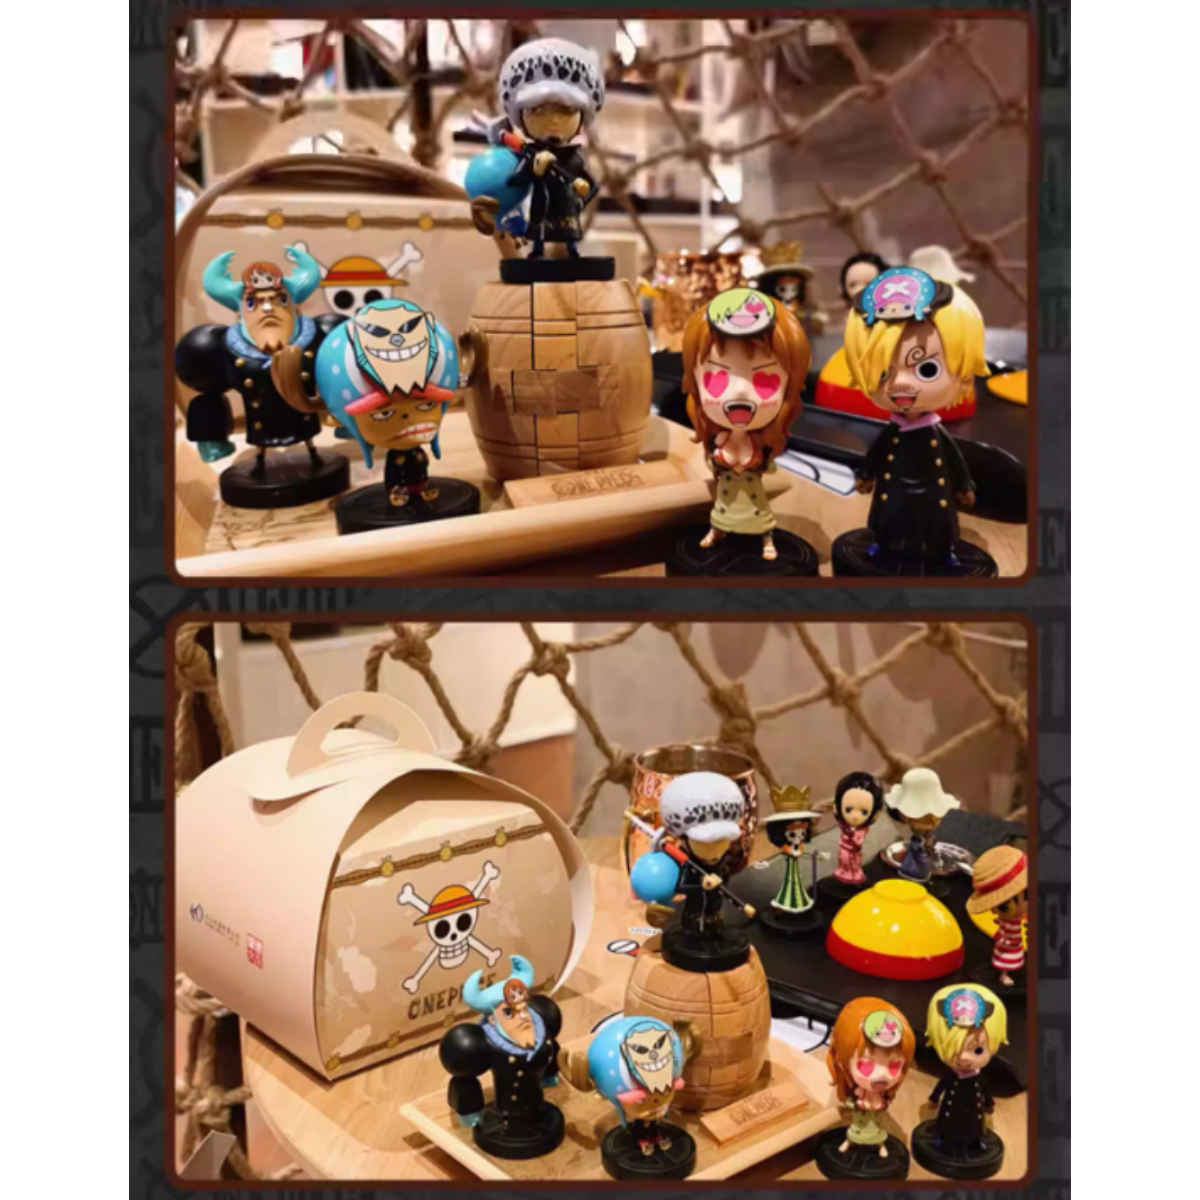 Win Main x One Piece 20th Anniversary Stamp Straw Hat Crew Series-Single Box (Random)-Win Main-Ace Cards &amp; Collectibles